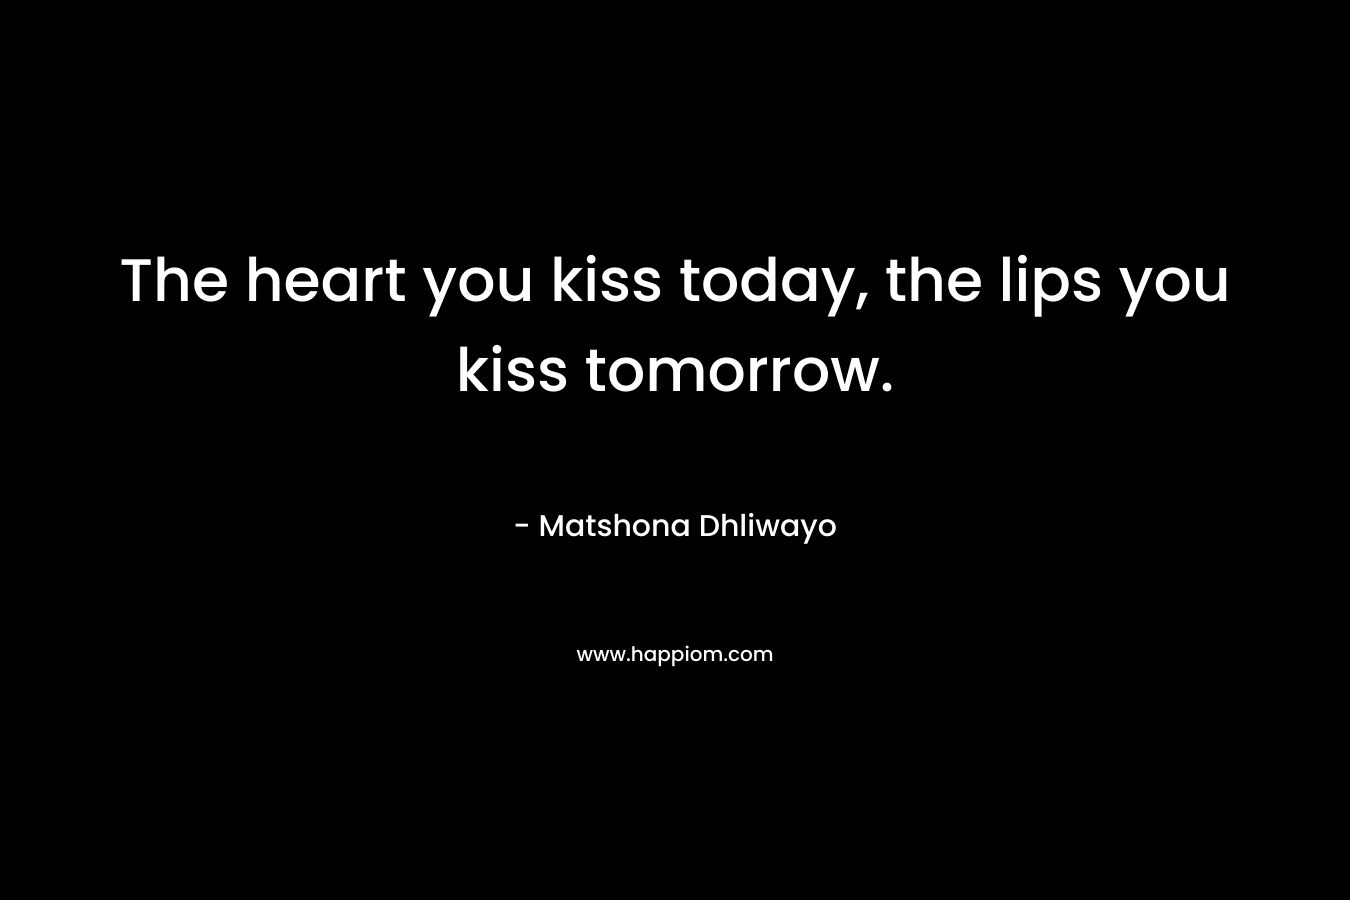 The heart you kiss today, the lips you kiss tomorrow.